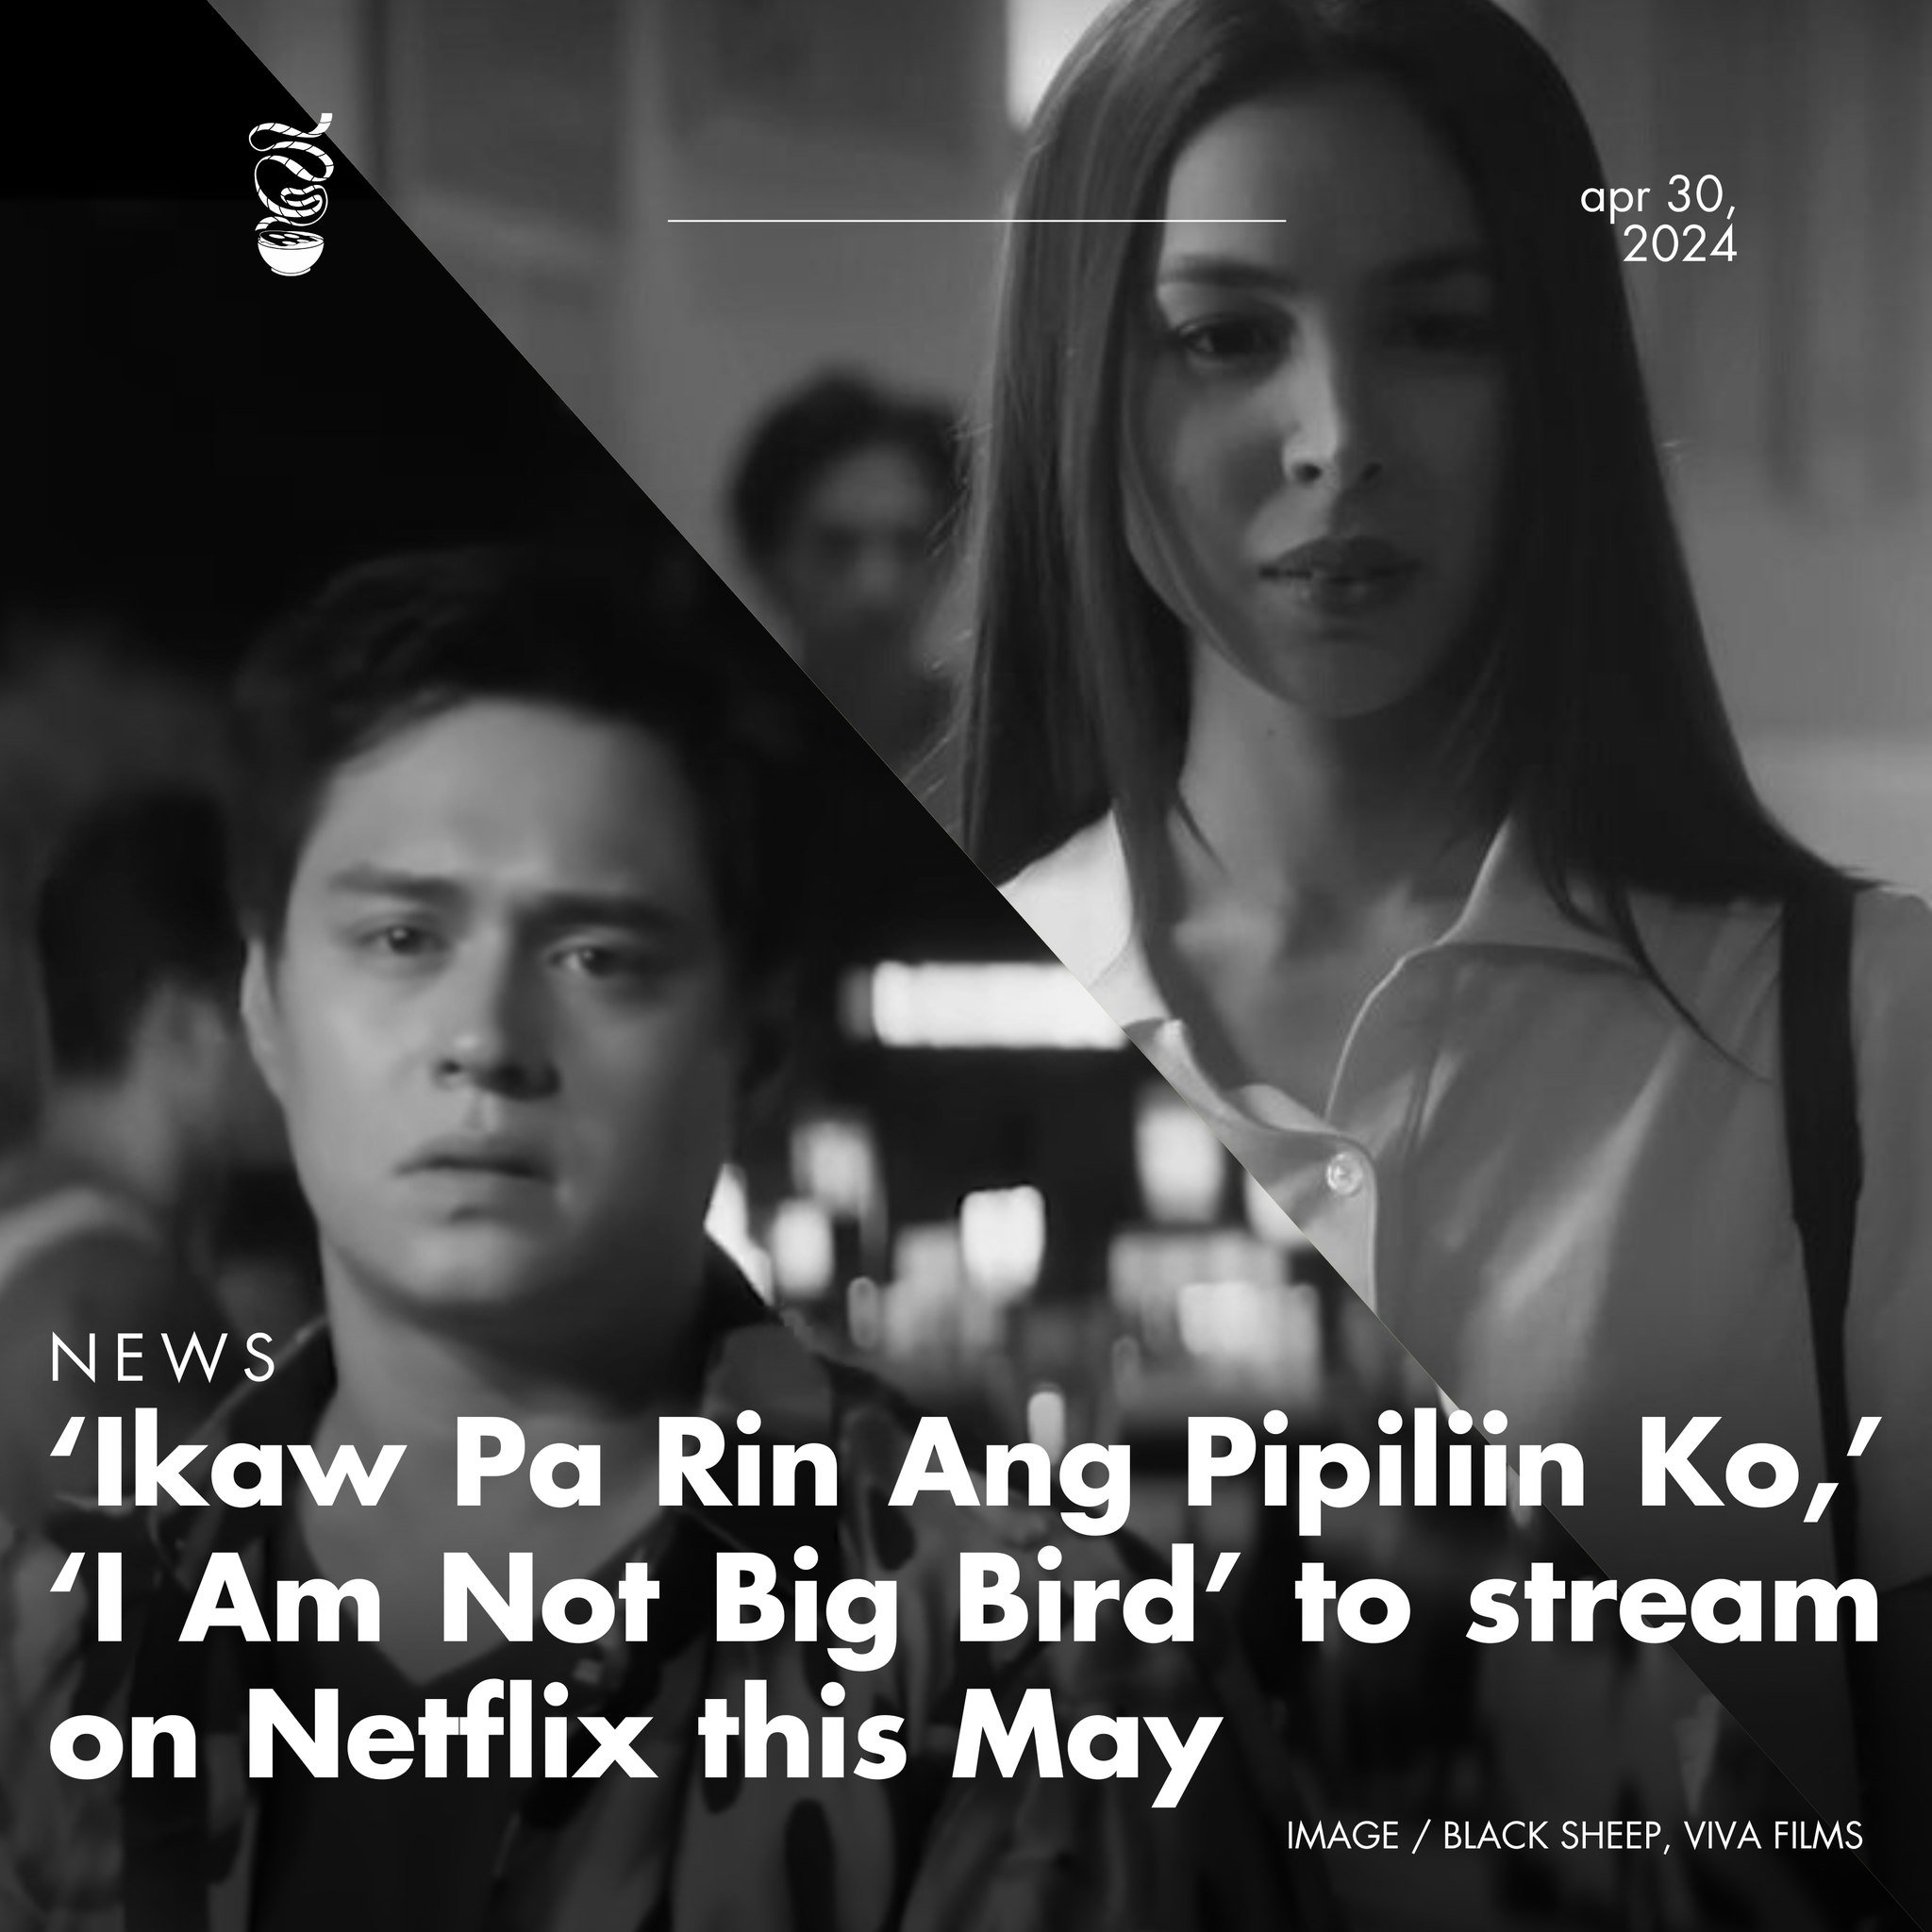 LOCAL FILMS ON NETFLIX!

Romantic drama 'Ikaw Pa Rin Ang Pipiliin Ko' starring Julia Barretto and Aga Muhlach, and raunchy comedy 'I Am Not Big Bird' starring Enrique Gil, will be available to stream on Netflix on May 7 and 21, respectively.